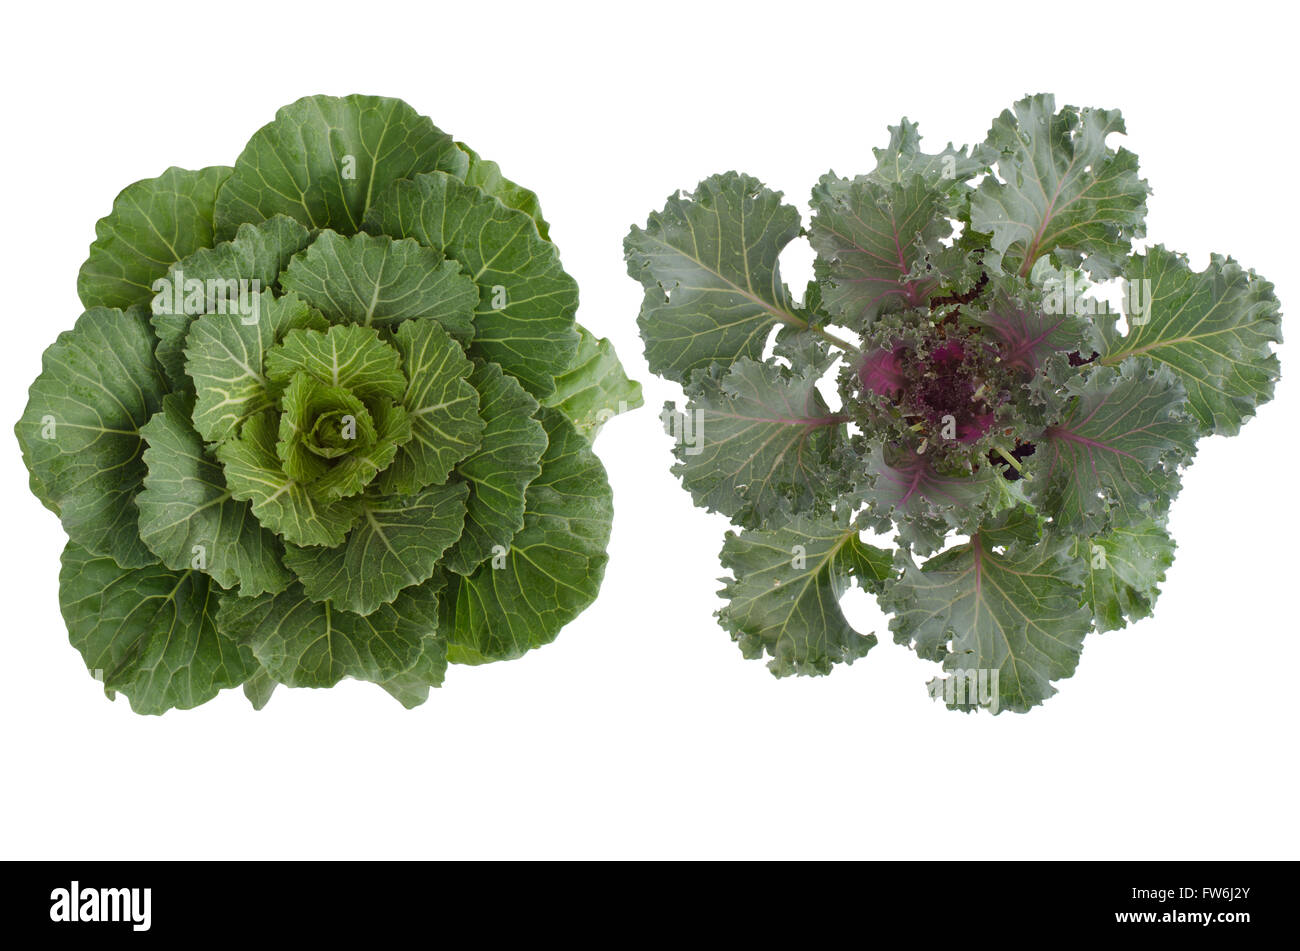 Longlived Cabbag (Brassica hybrid cv. Pule)  isolated on white background Stock Photo